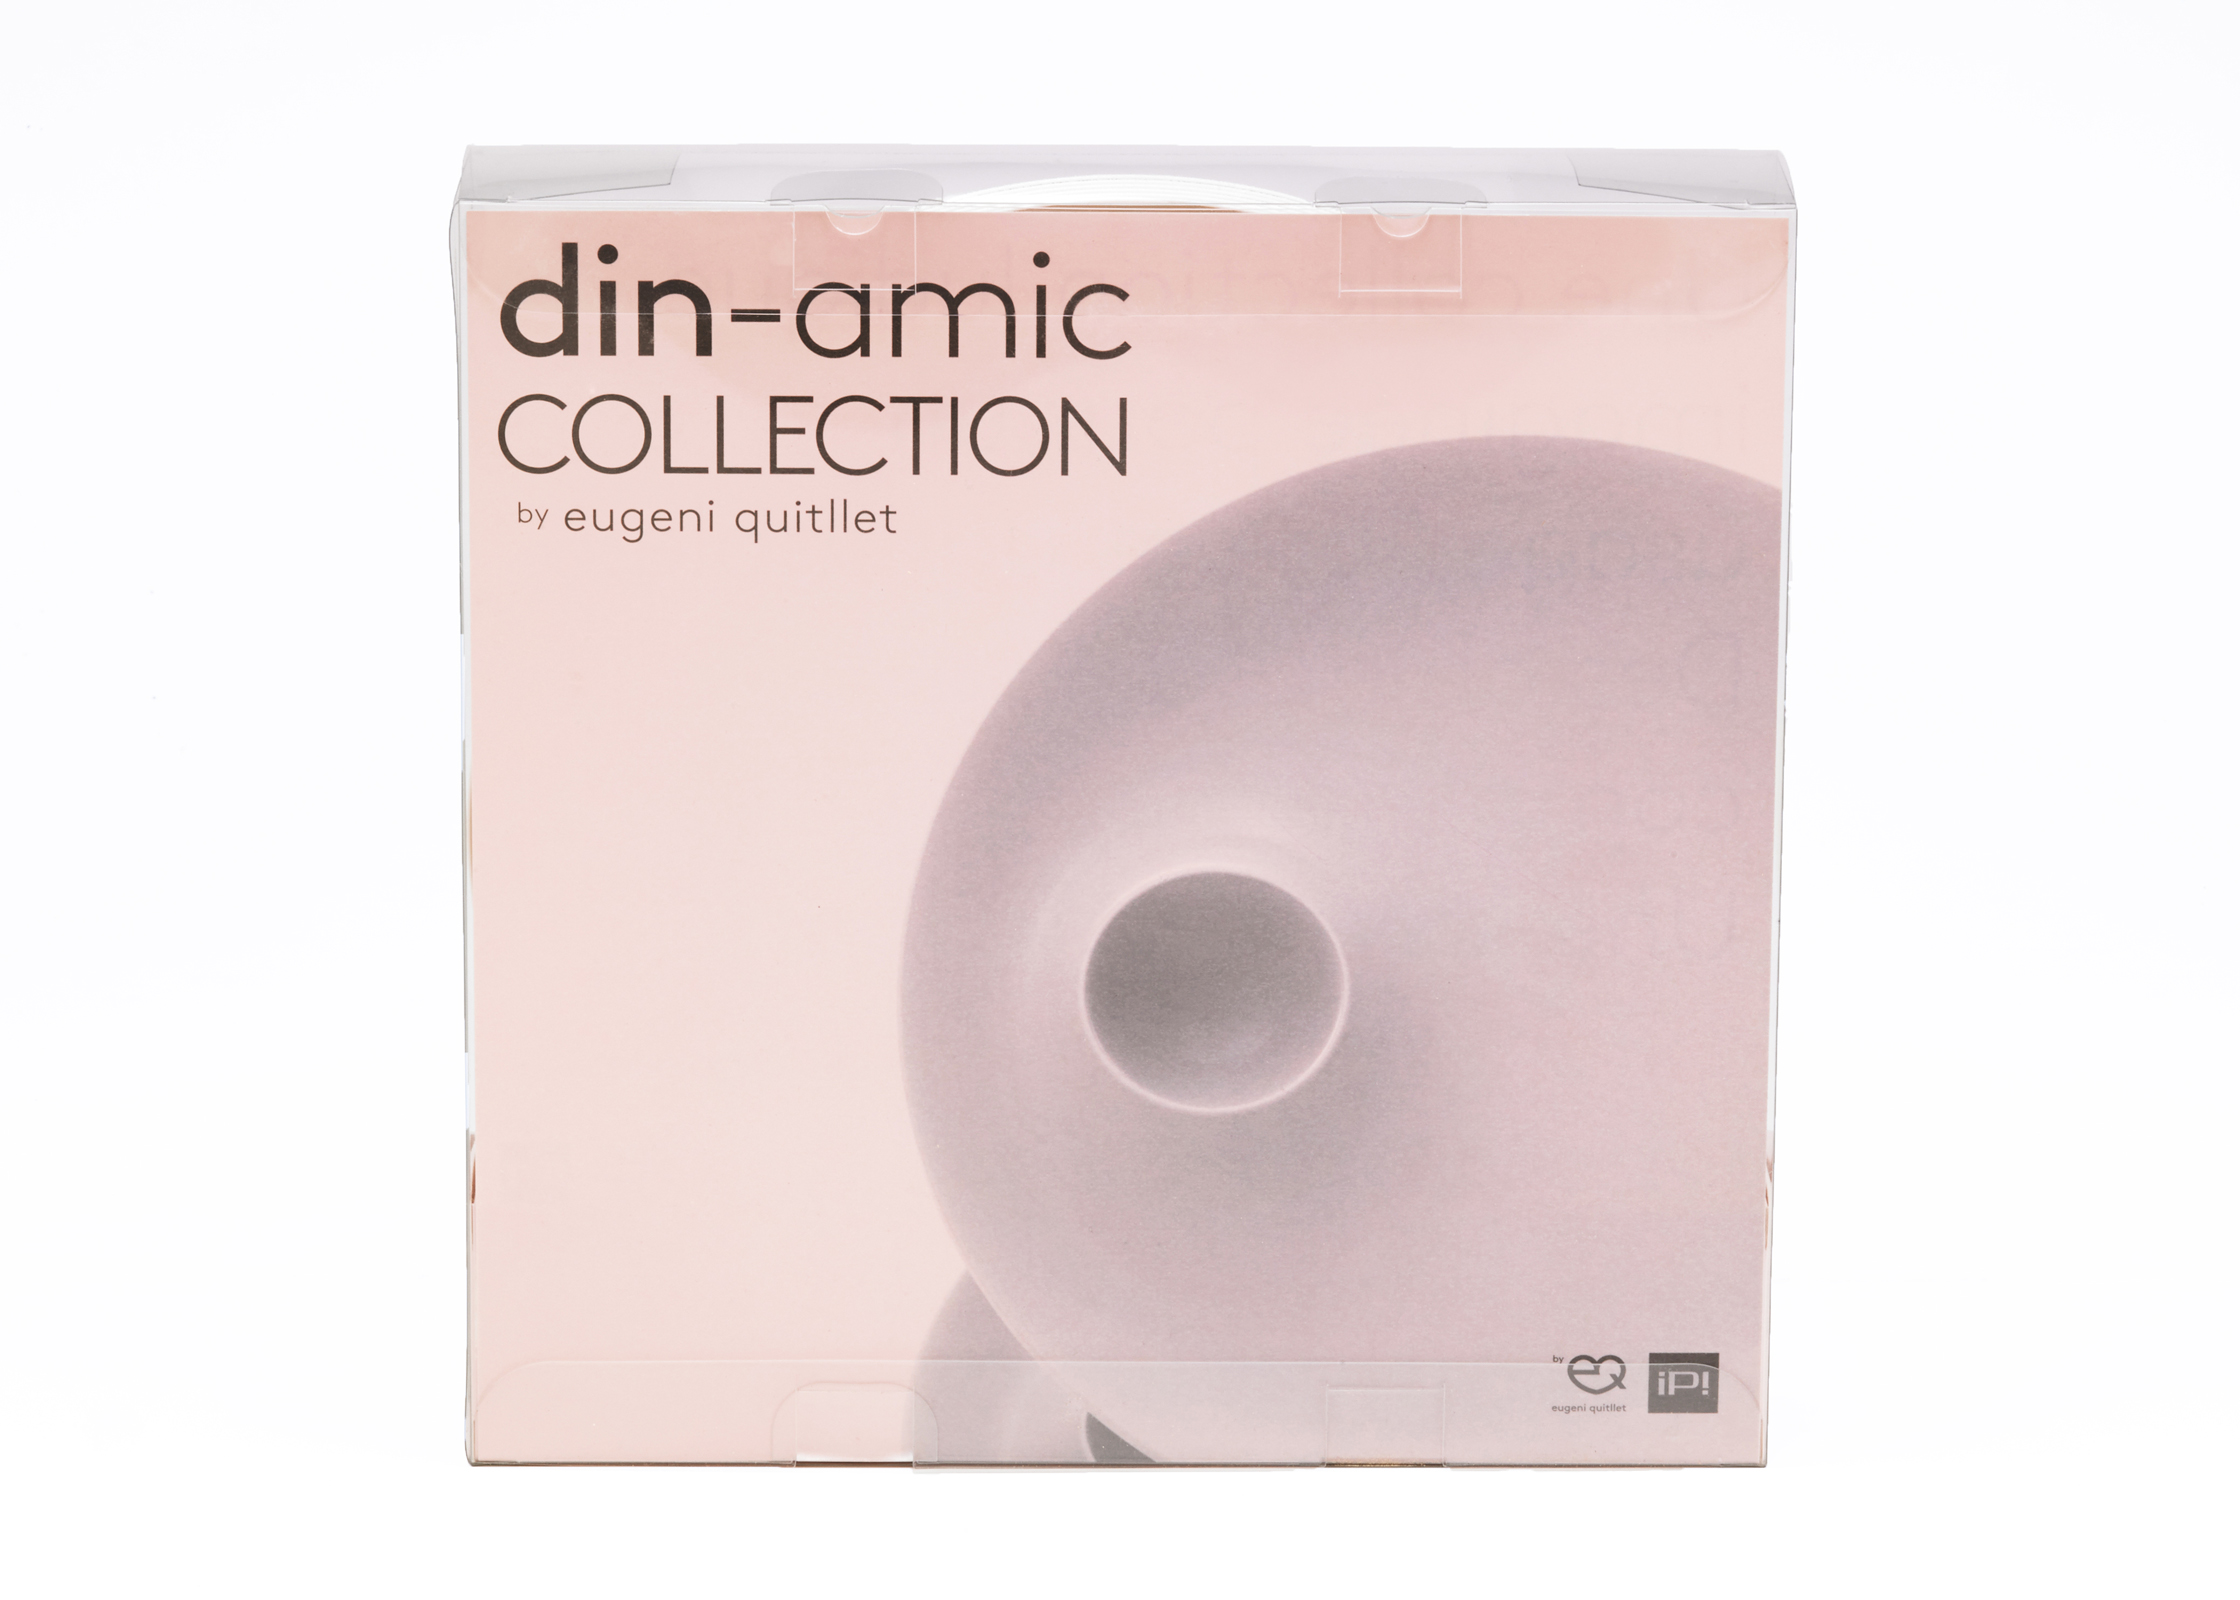 DIN-AMIC COLLECTION POMPIDOU EDITION